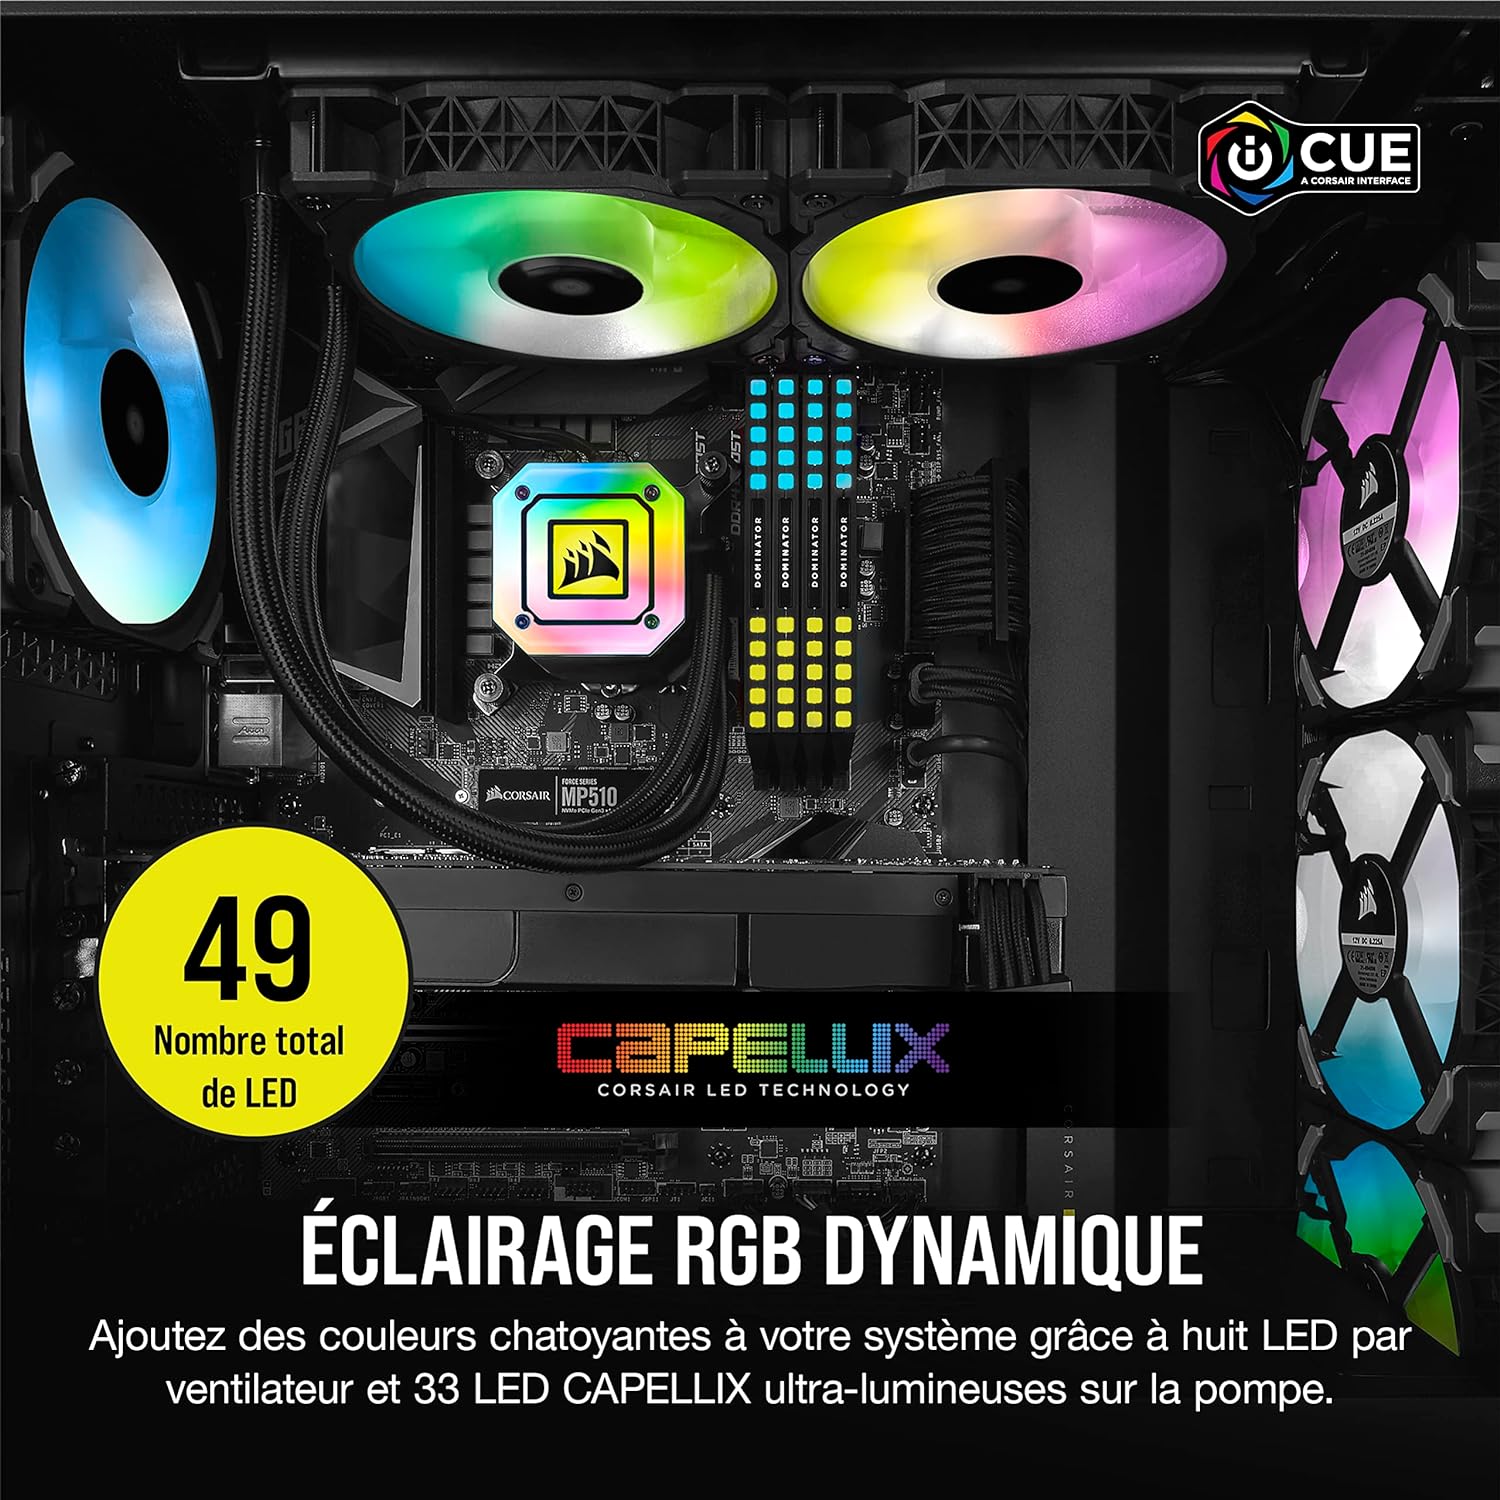 Corsair iCUE H115i Elite Capellix Liquid CPU Cooler - Extreme CPU cooling with controllable fan performance from 400 to 2,000 RPM. 0840006618768